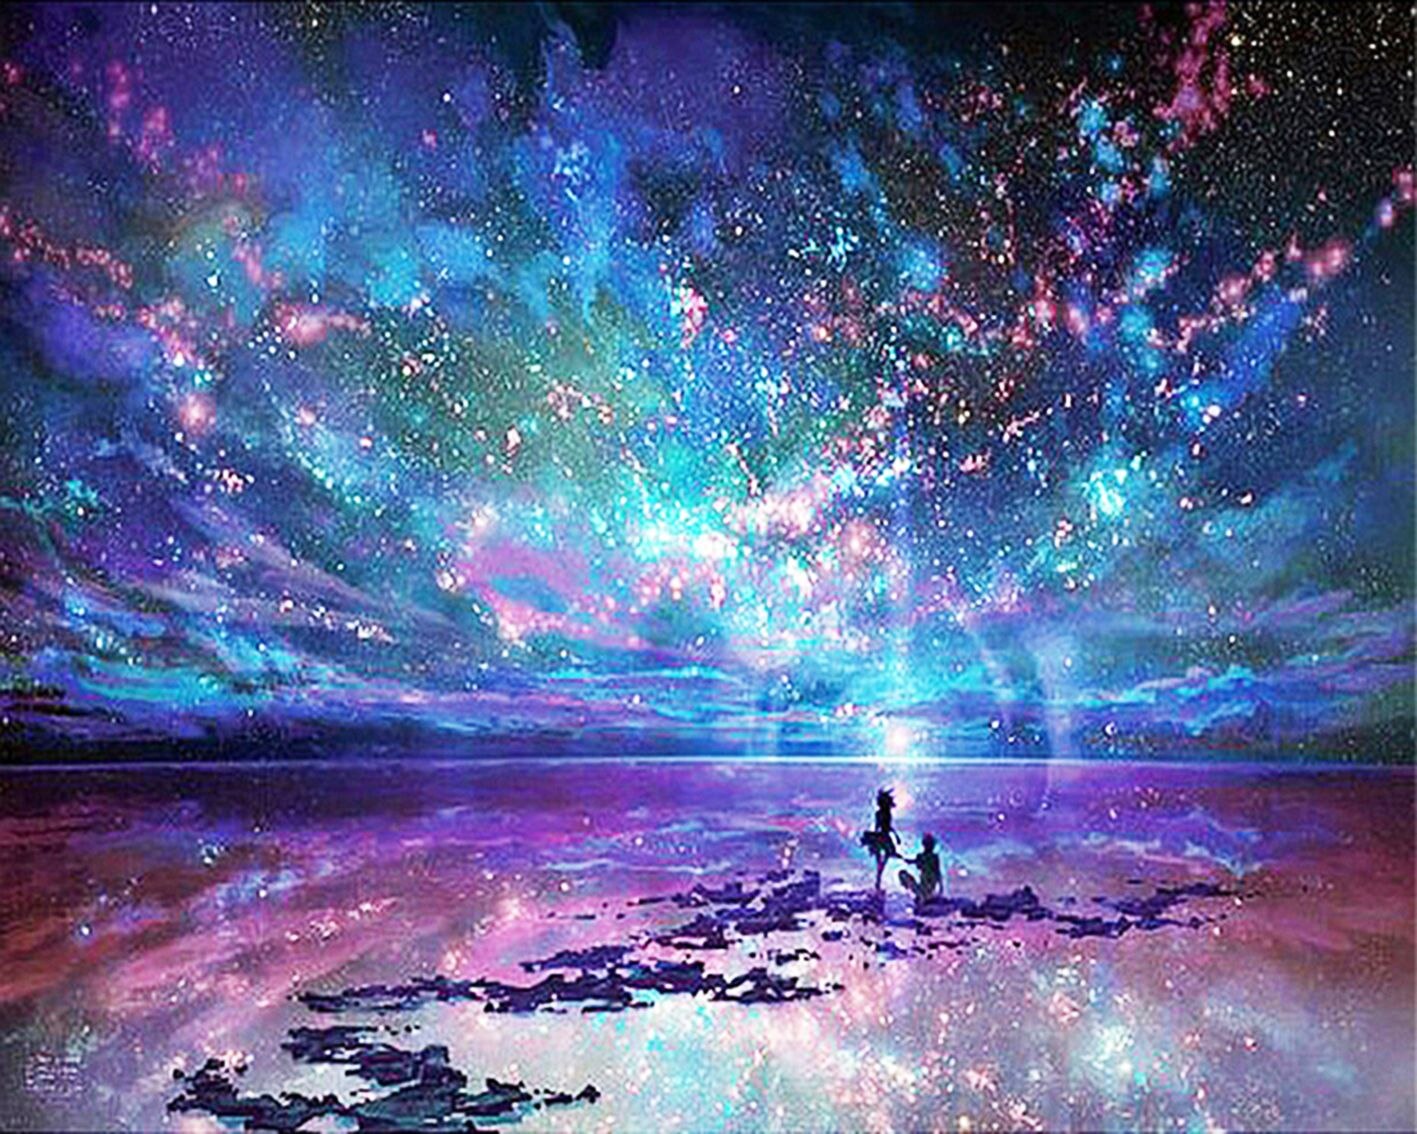 RUOPOTY 5D DIY Diamond Painting Space Aurora Full Square Drill Diamond Embroidery Scenery Rhinestone Picture Home Decor DIY Gift